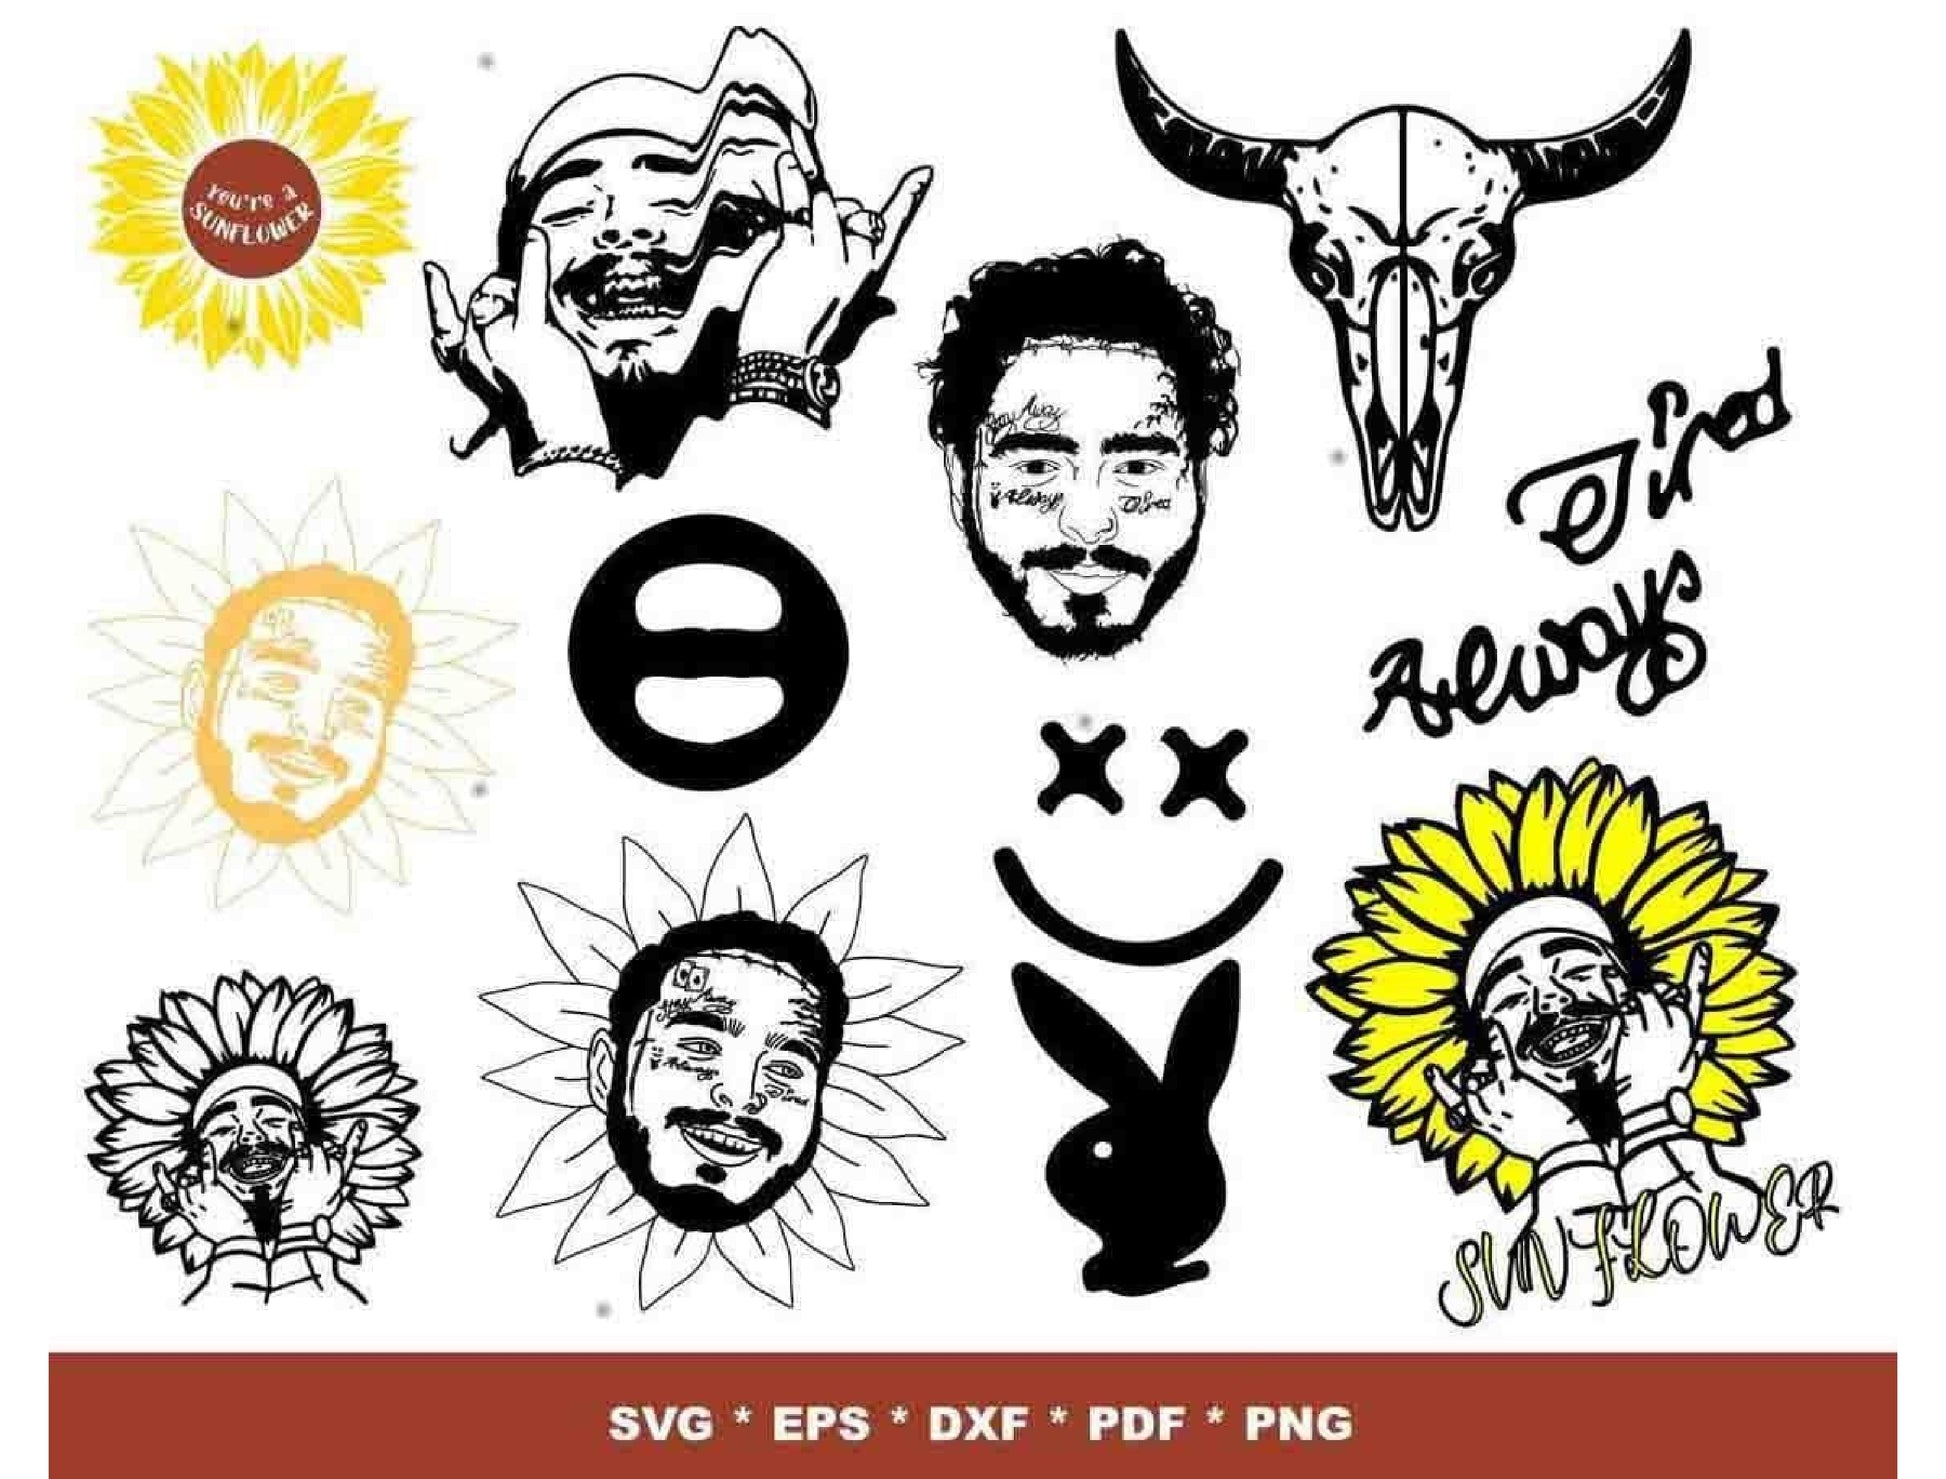 Post Malone SVG Bundle - 270+ files Post Malone SVG, EPS, PNG, DXF for Cricut, Silhouette